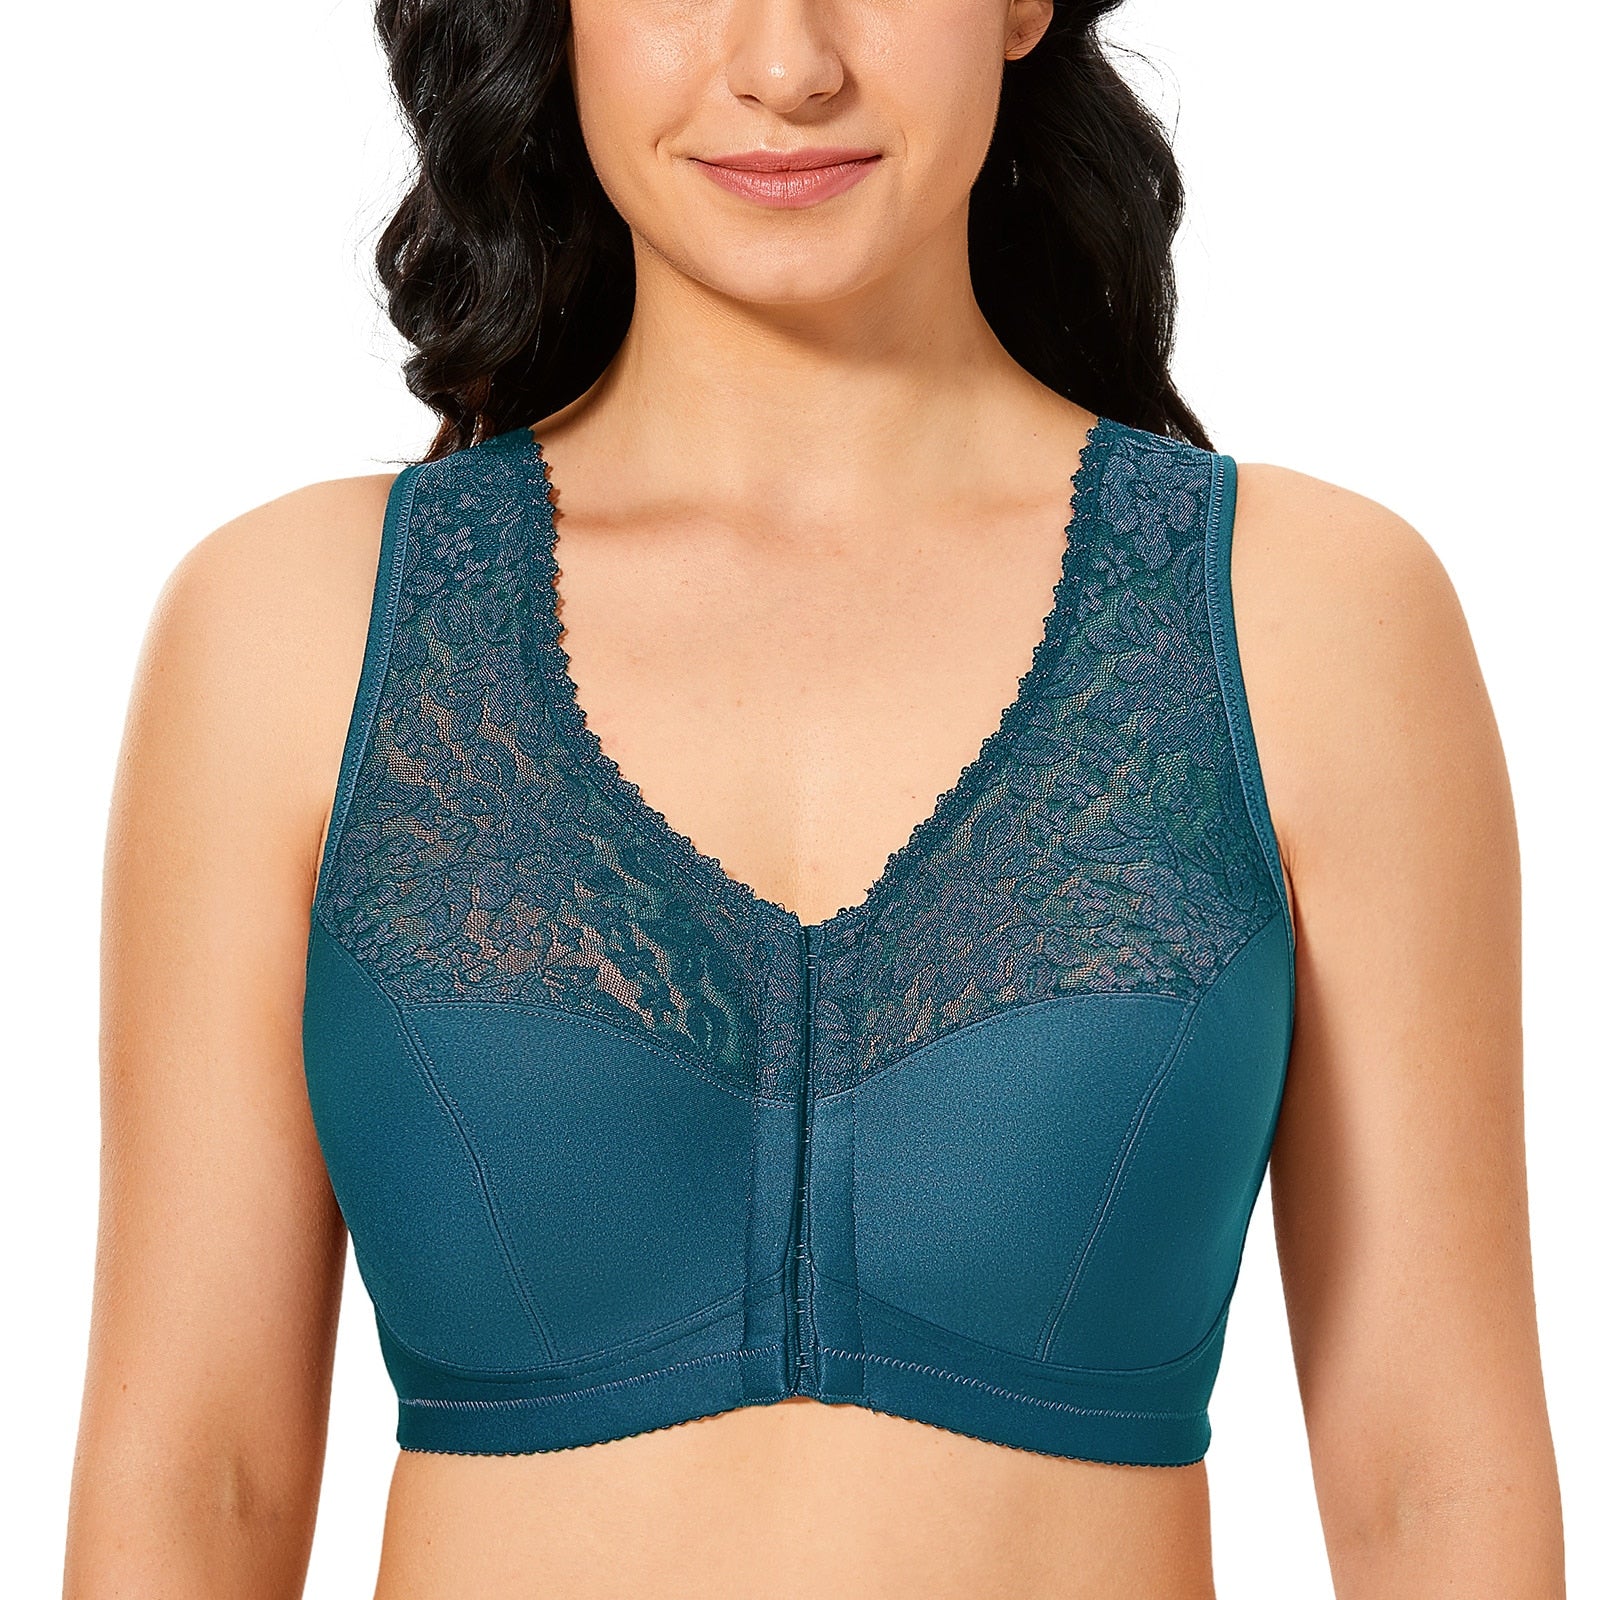 Women's Front Closure Bra Full Cup Wirefree Racerback Lace Plus